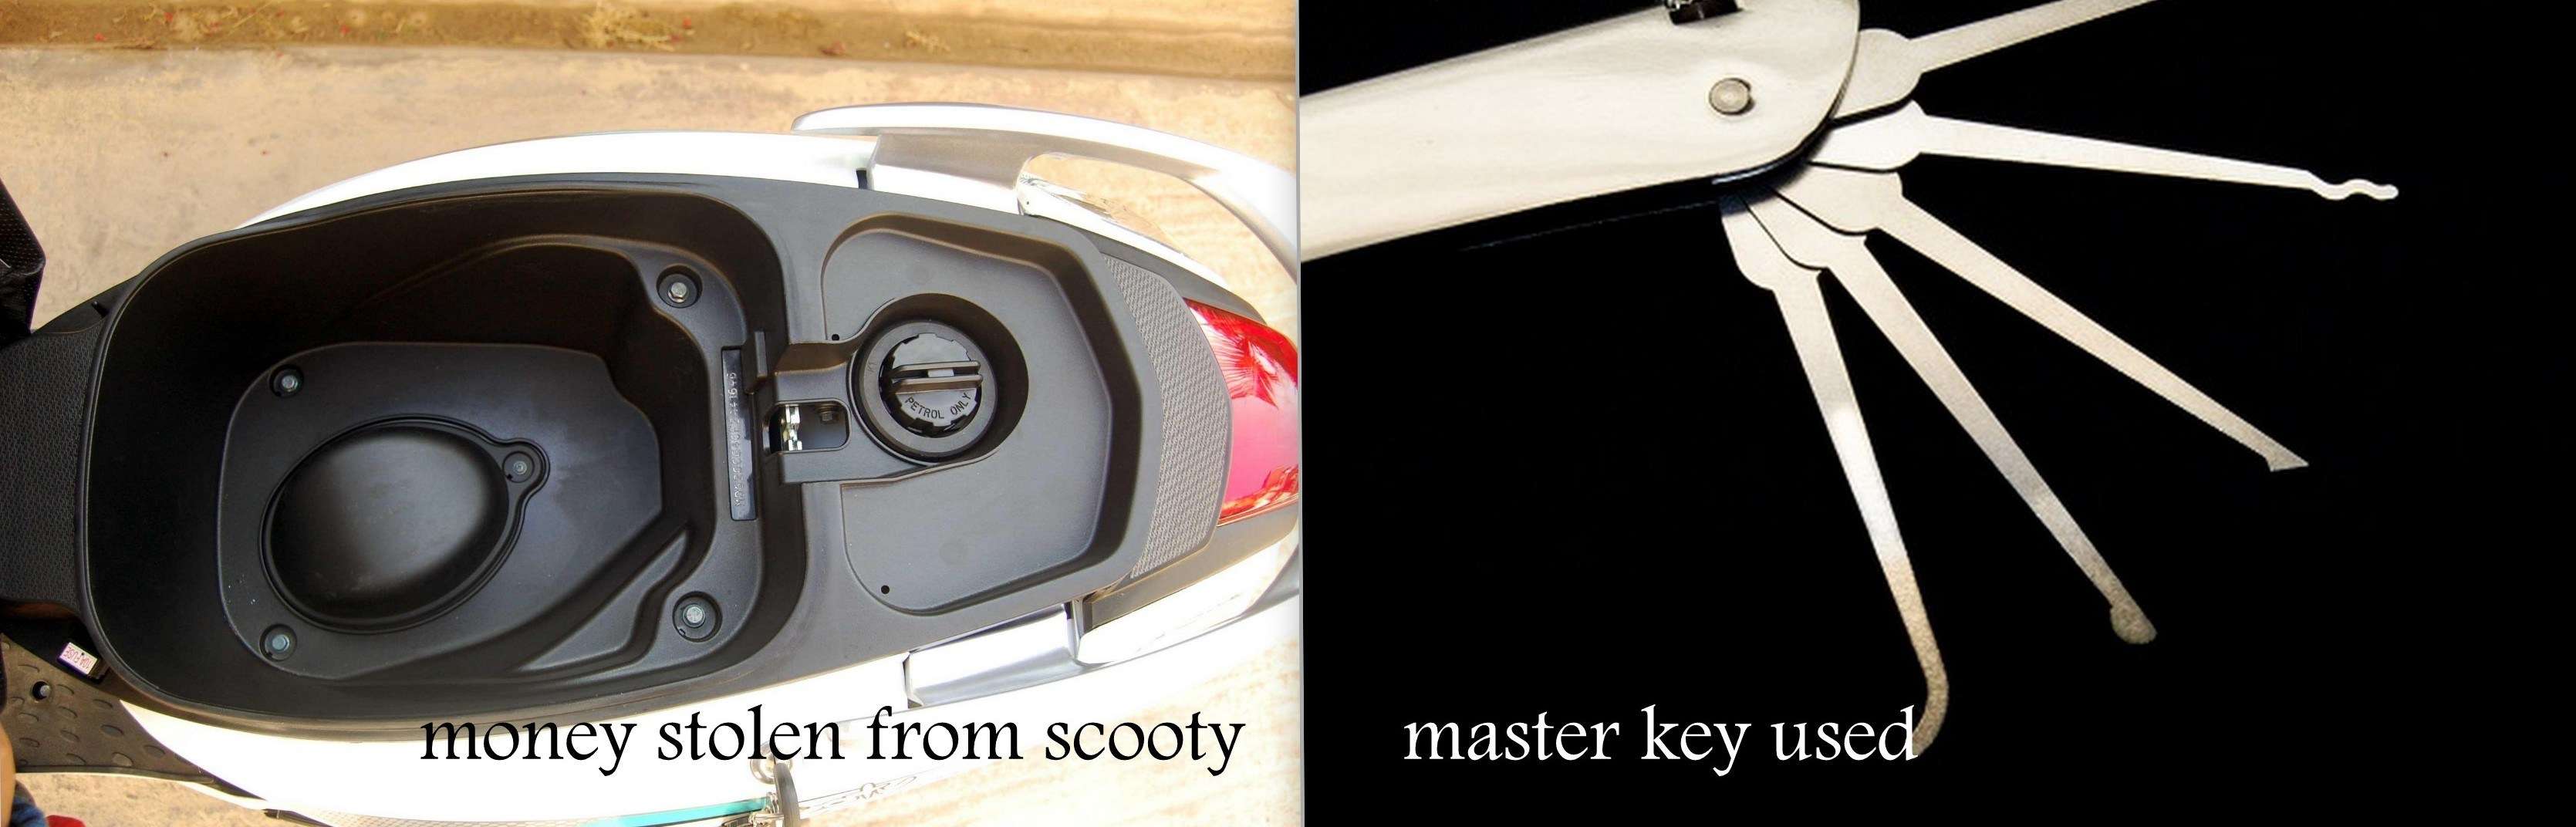 Money stolen from Scooty-Master key used